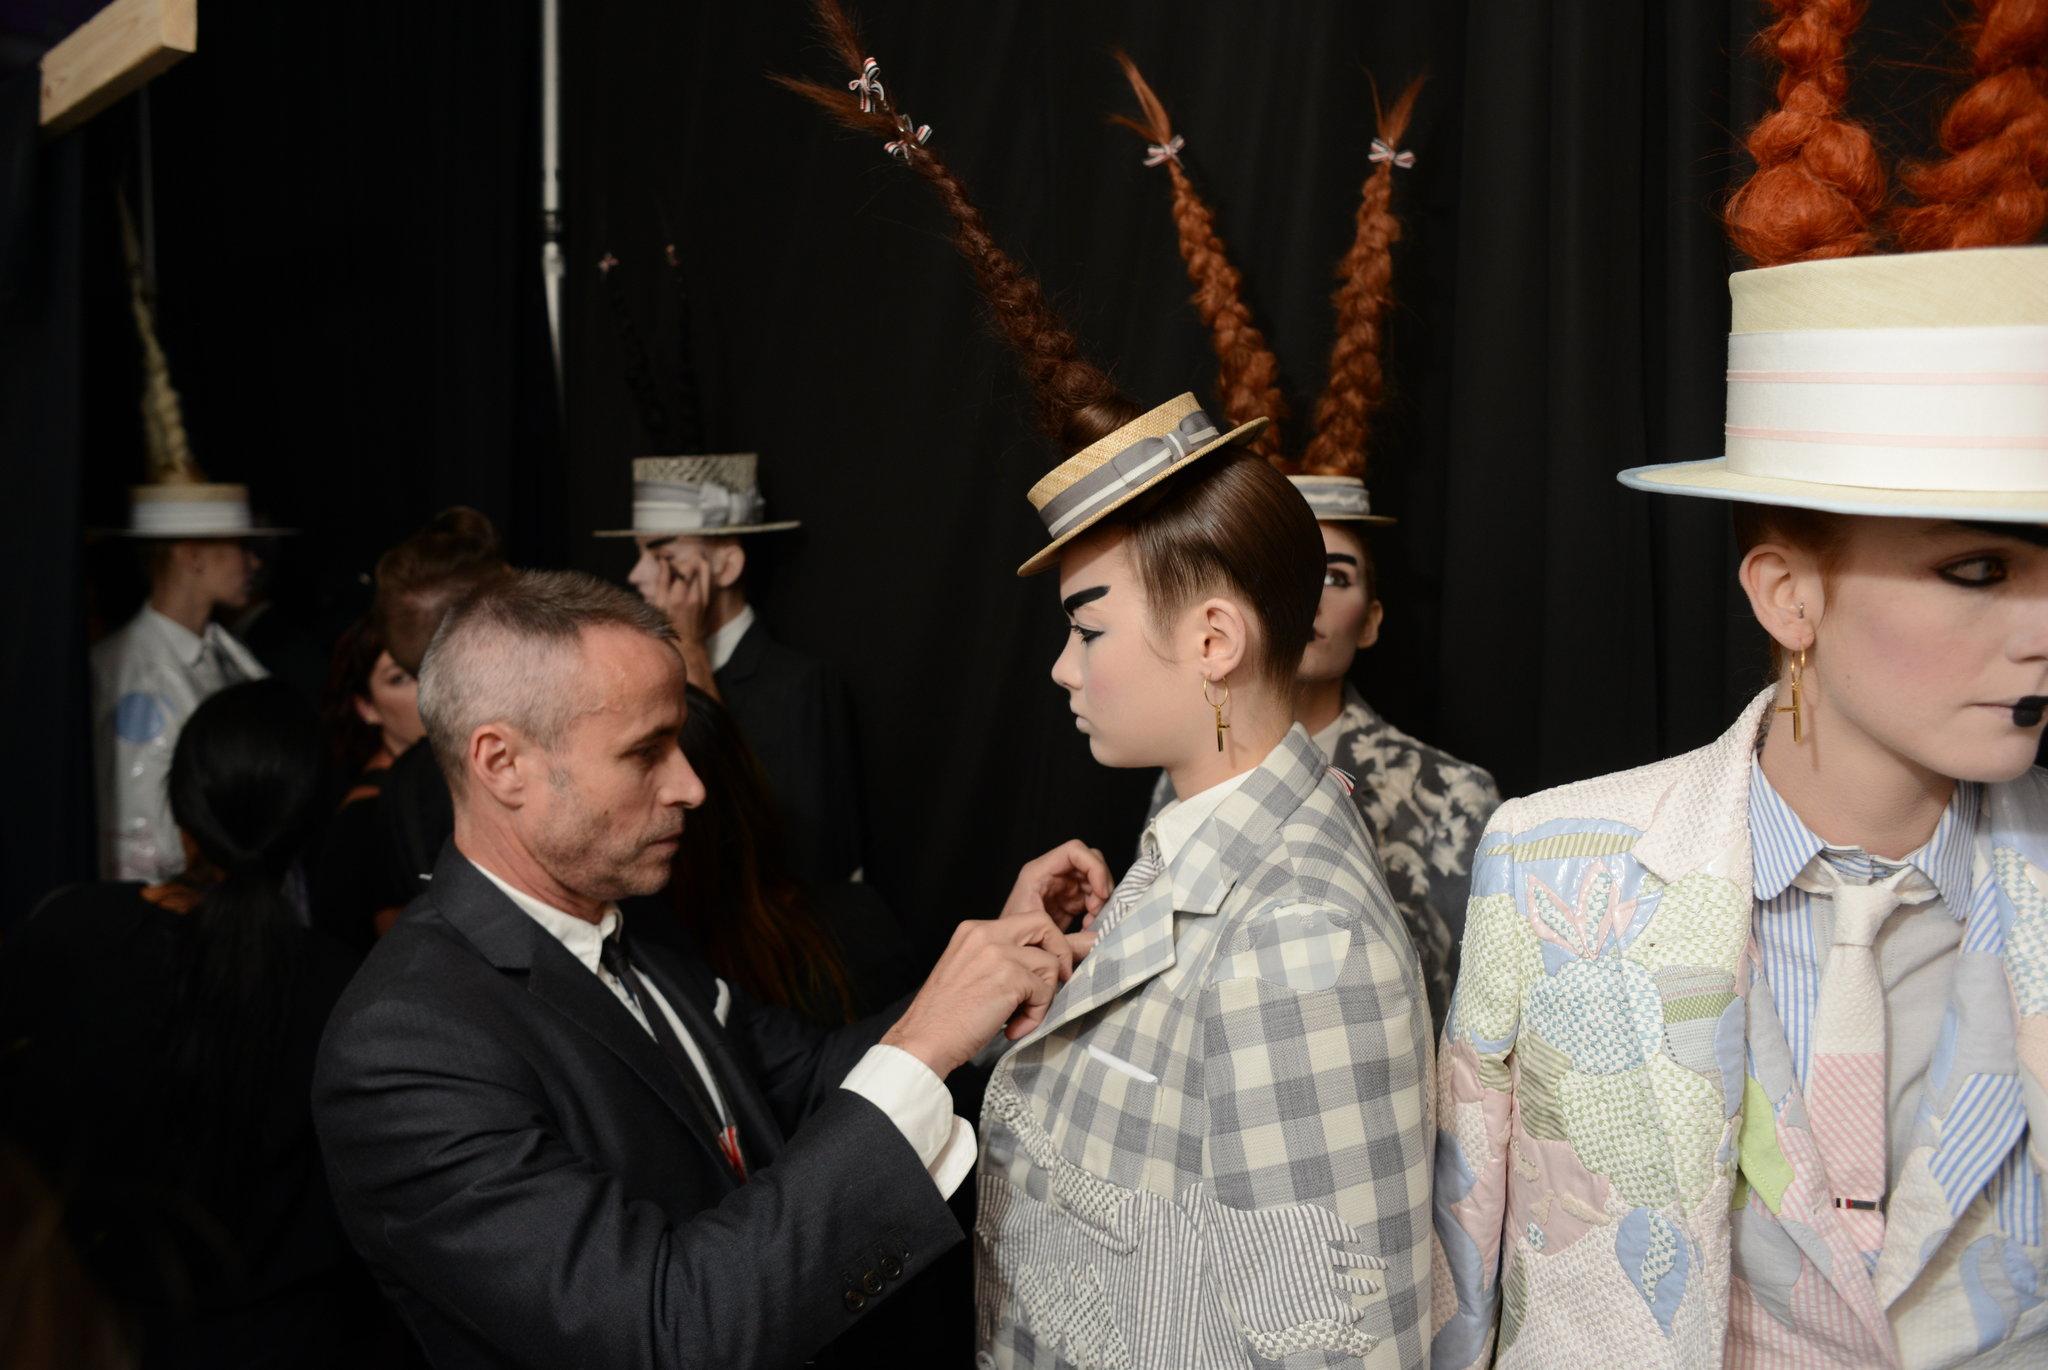 Backstage at the Thom Browne spring 2016 show in New York.